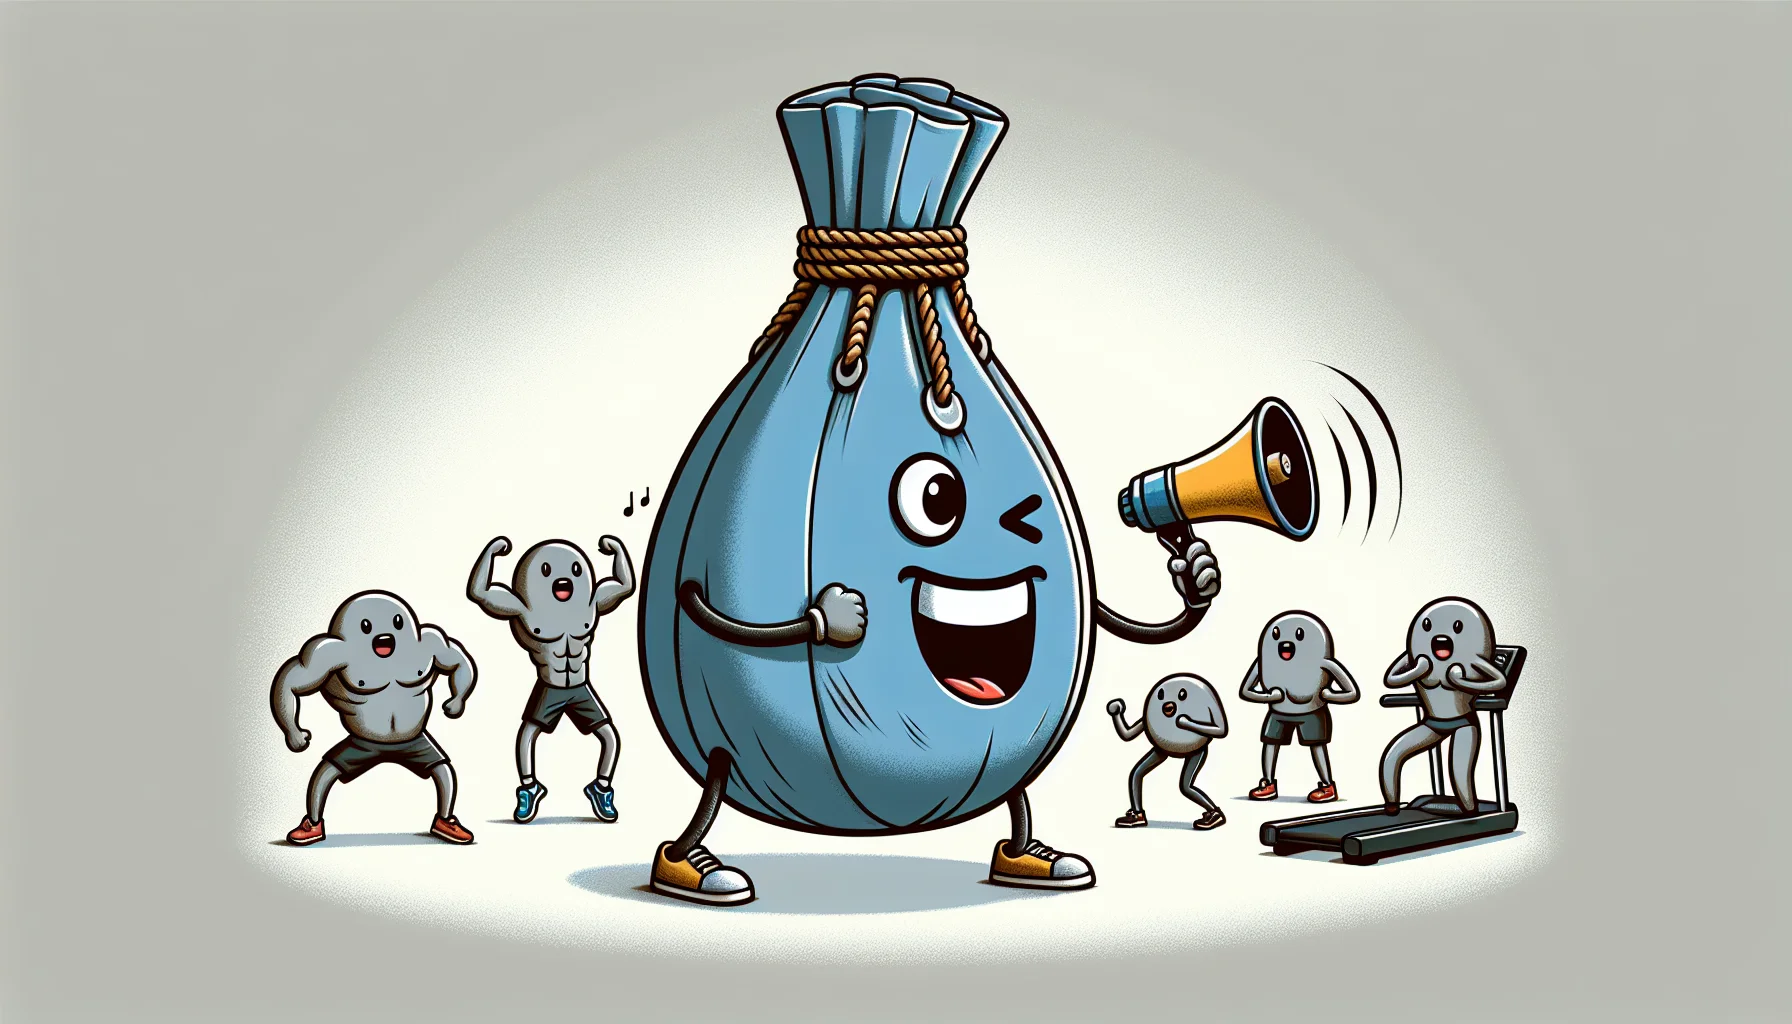 Create a humorous illustration of a powerlifting bag, traditionally used for strength training, placed in an unexpected scenario to motivate people to exercise. Imagine the powerlifting bag with animated expressions, wearing a fitness instructor's whistle around its non-existent neck, holding a megaphone in its side handle and attempting to conduct an aerobics class for other gym equipment like treadmills and dumbbells, which are given human like qualities and seem to be engaging in the class with enthusiasm and dedication.